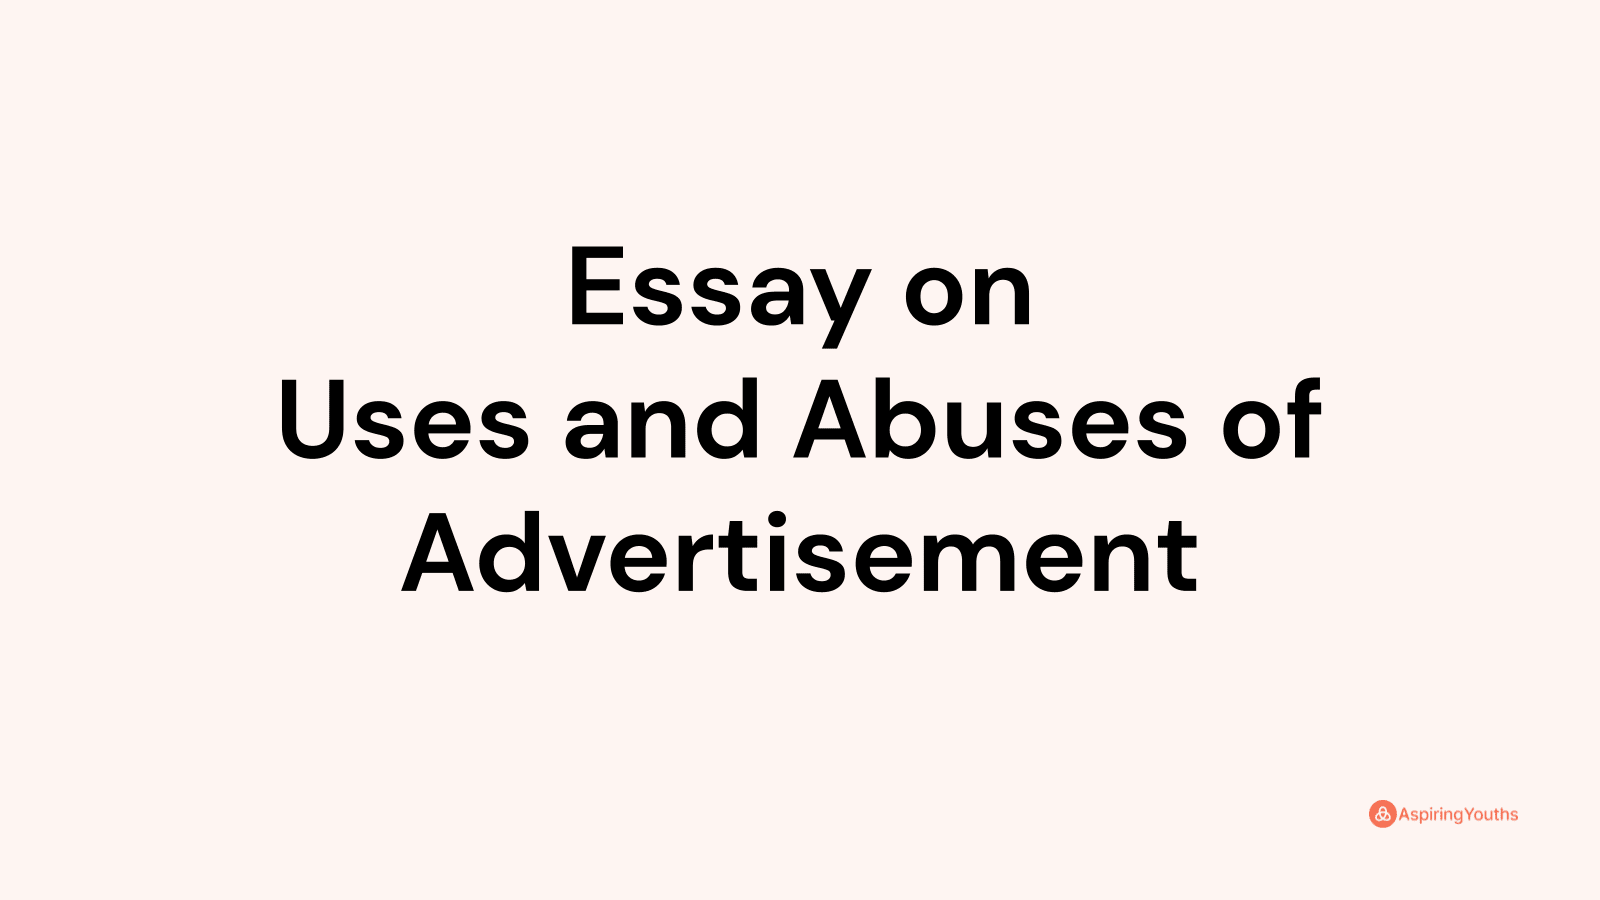 an essay on advertising its uses and abuses